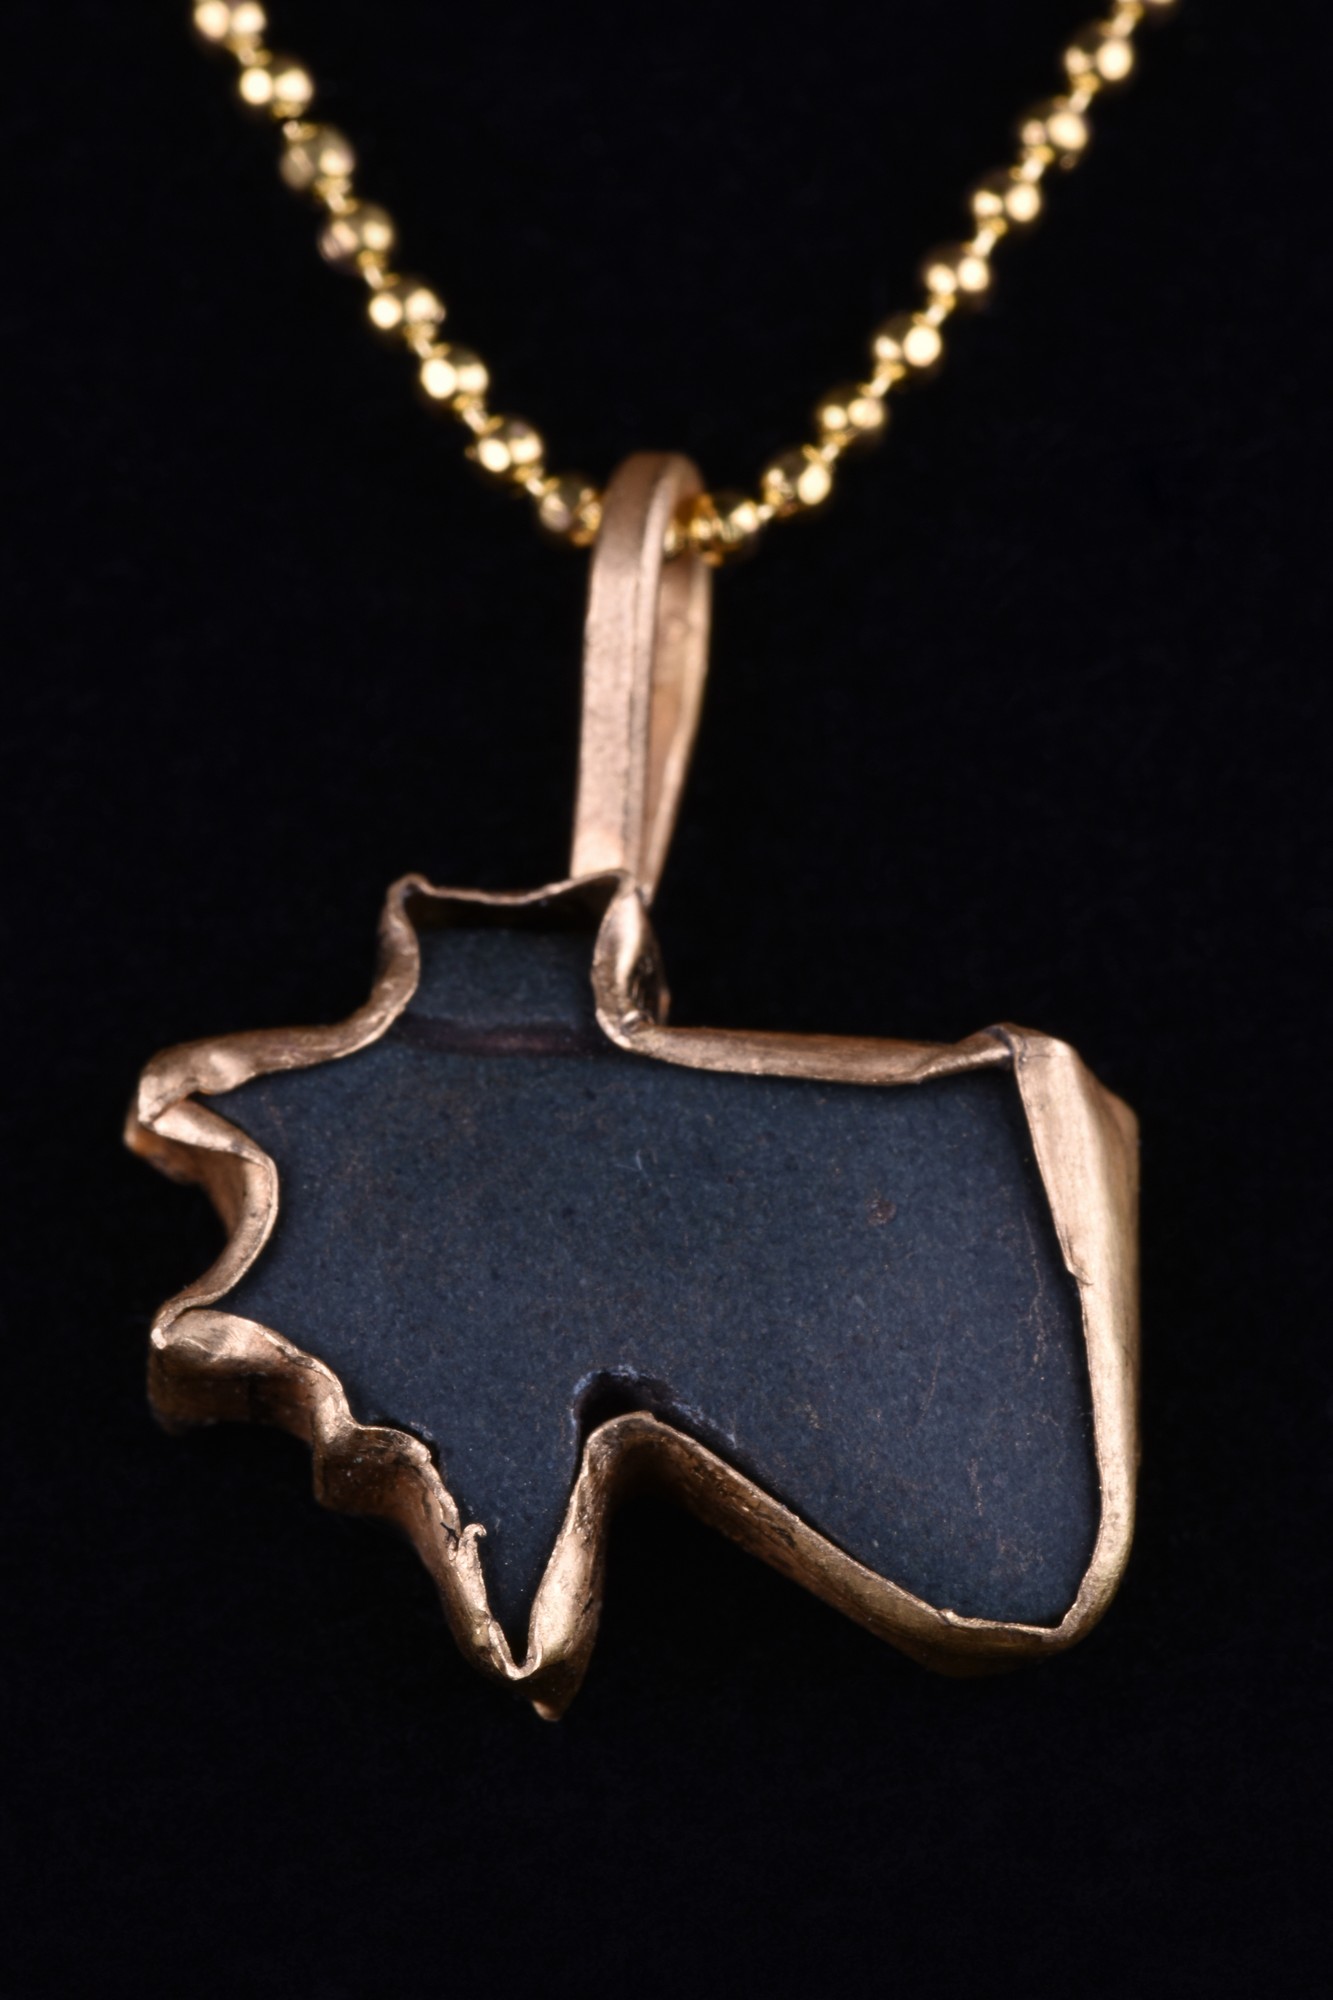 ANCIENT EGYPTIAN EYE OF HORUS IN GOLD PENDANT - Image 4 of 4